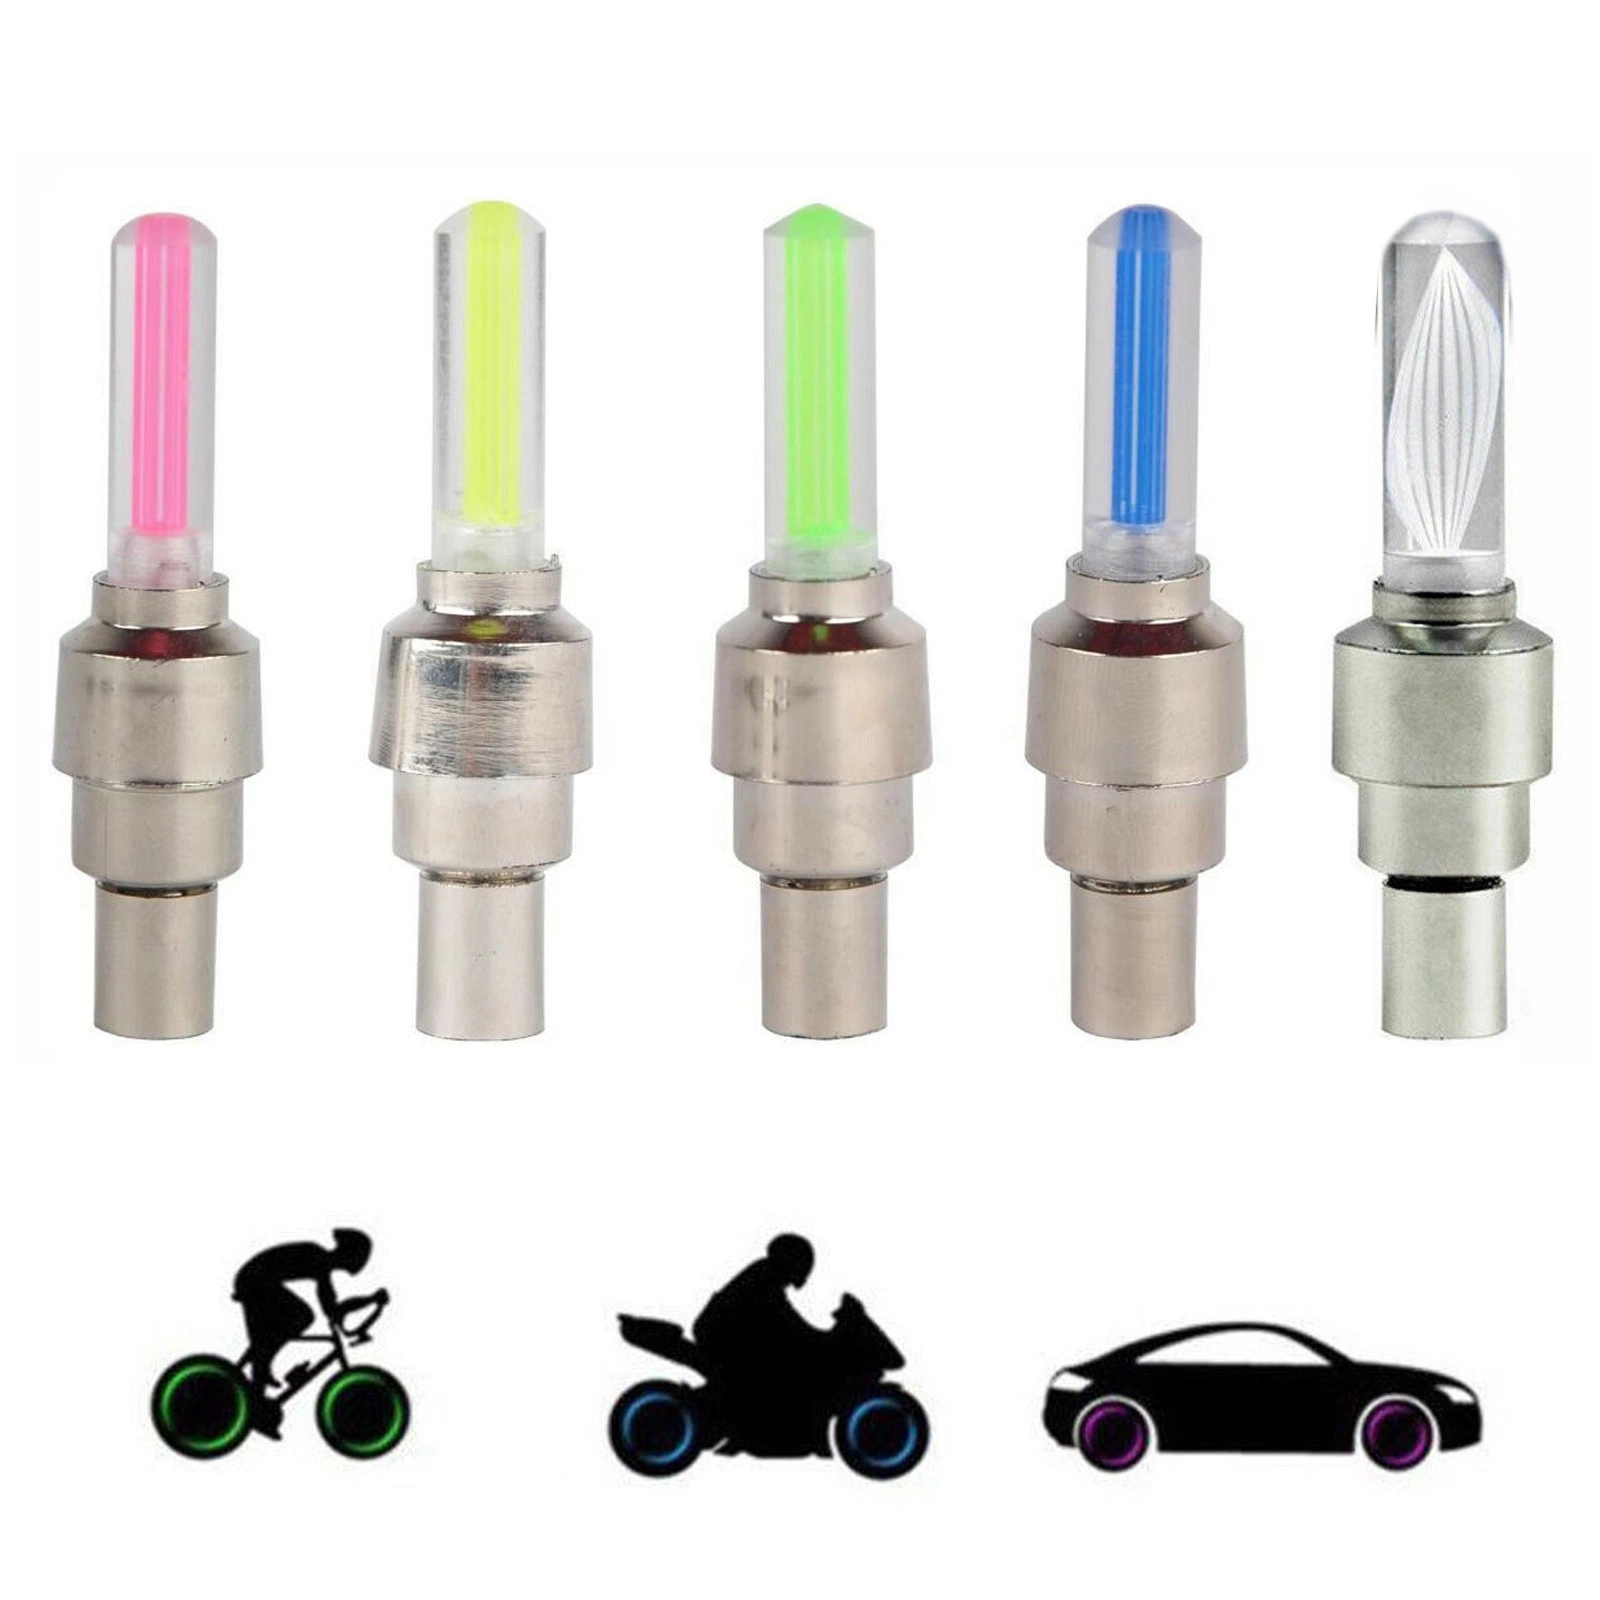 Low Price Bike Accessories LED Bicycle Wheel Light Tire Light